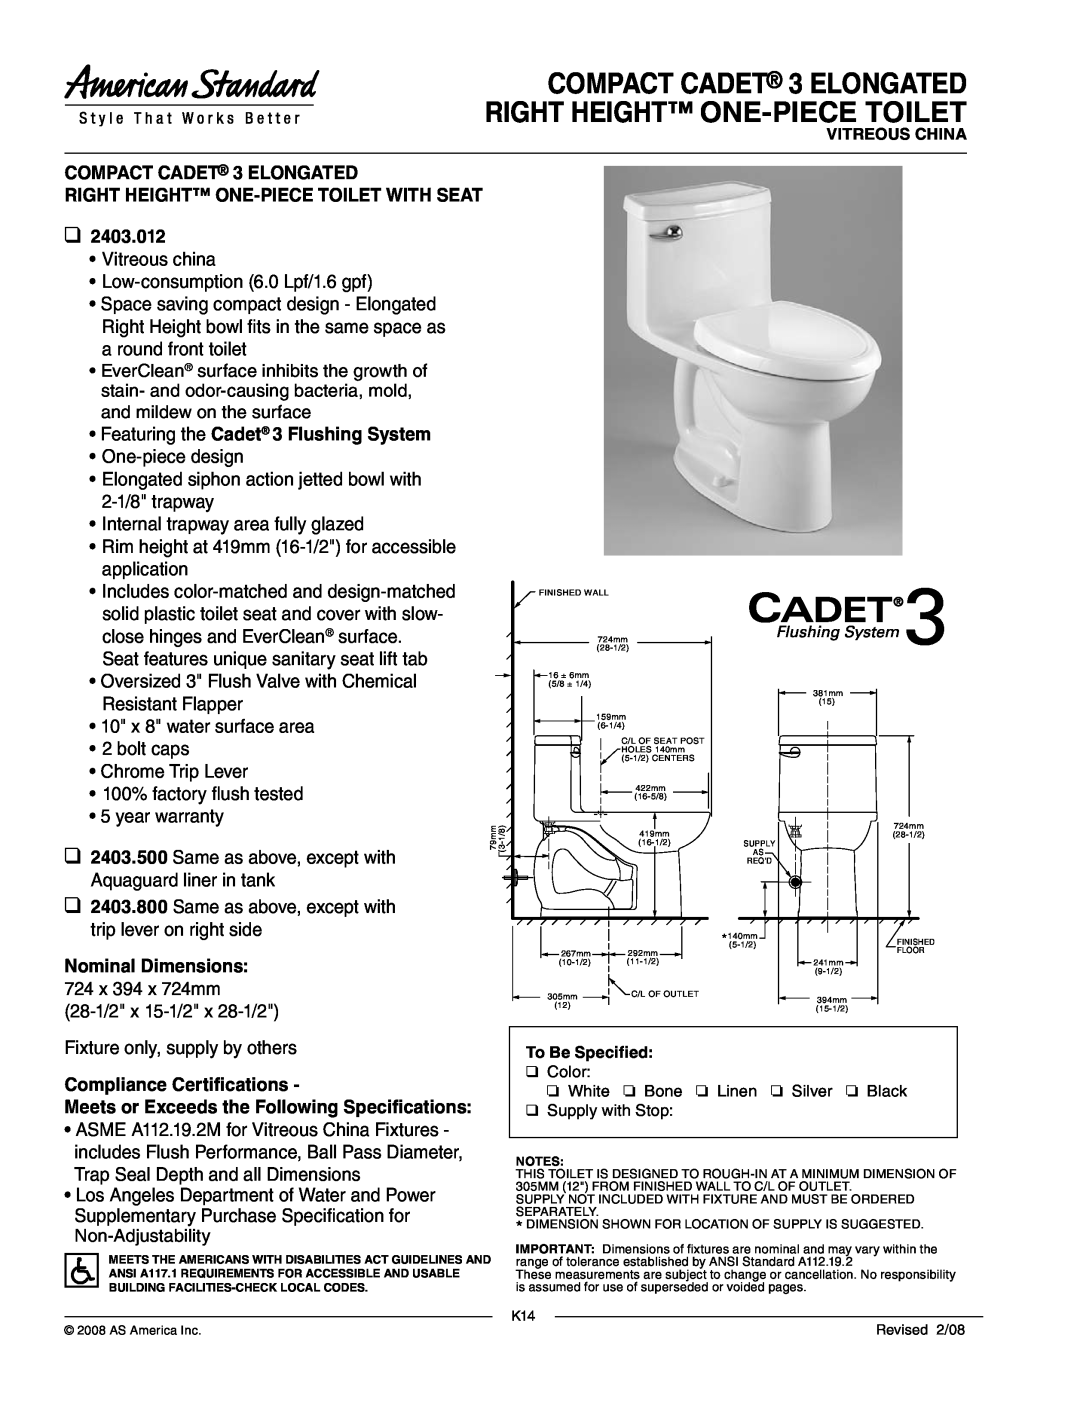 American Standard 2403.800, 2403.500 warranty COMPACT CADET 3 ELONGATED, Right Height One-Piecetoilet, Nominal Dimensions 